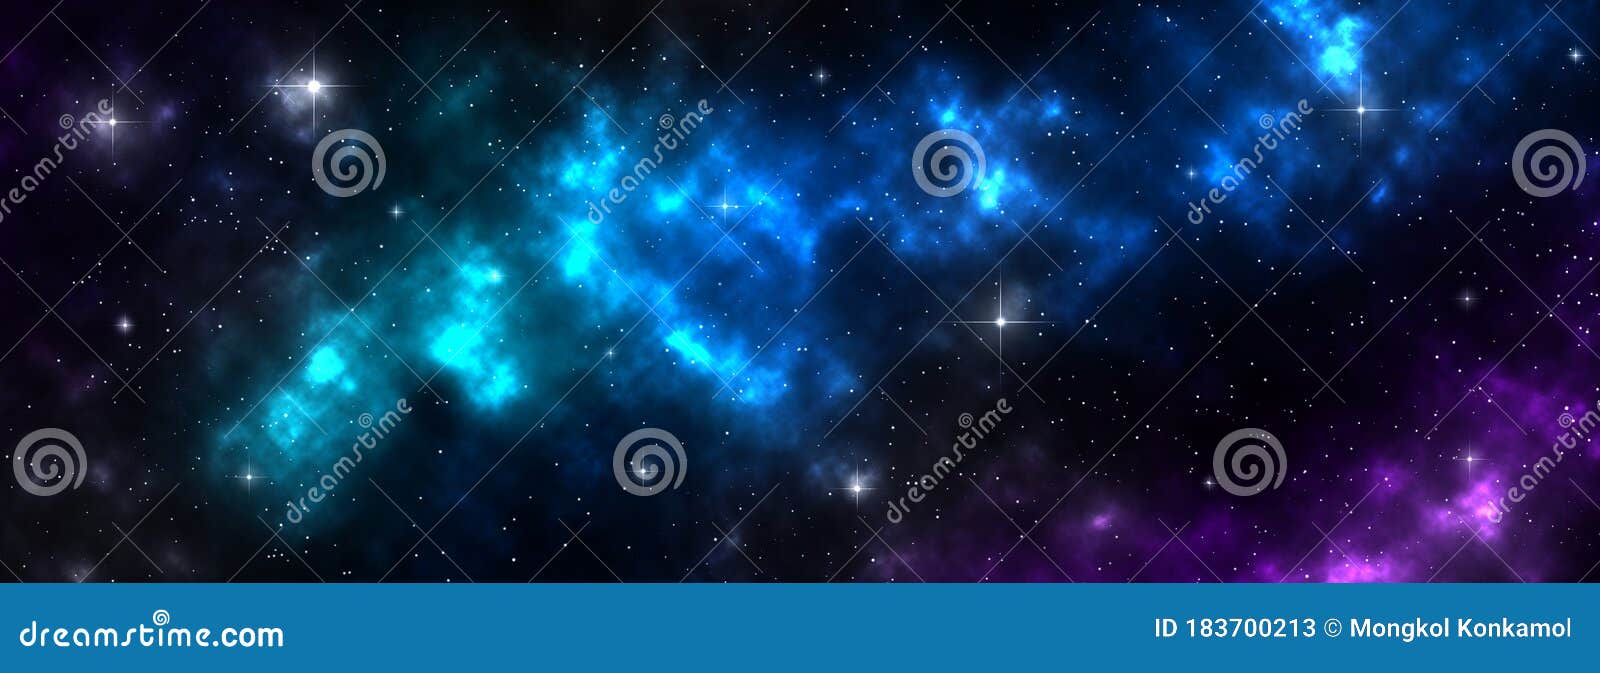 Space Galaxy Background With Shining Stars And Nebula In Blue